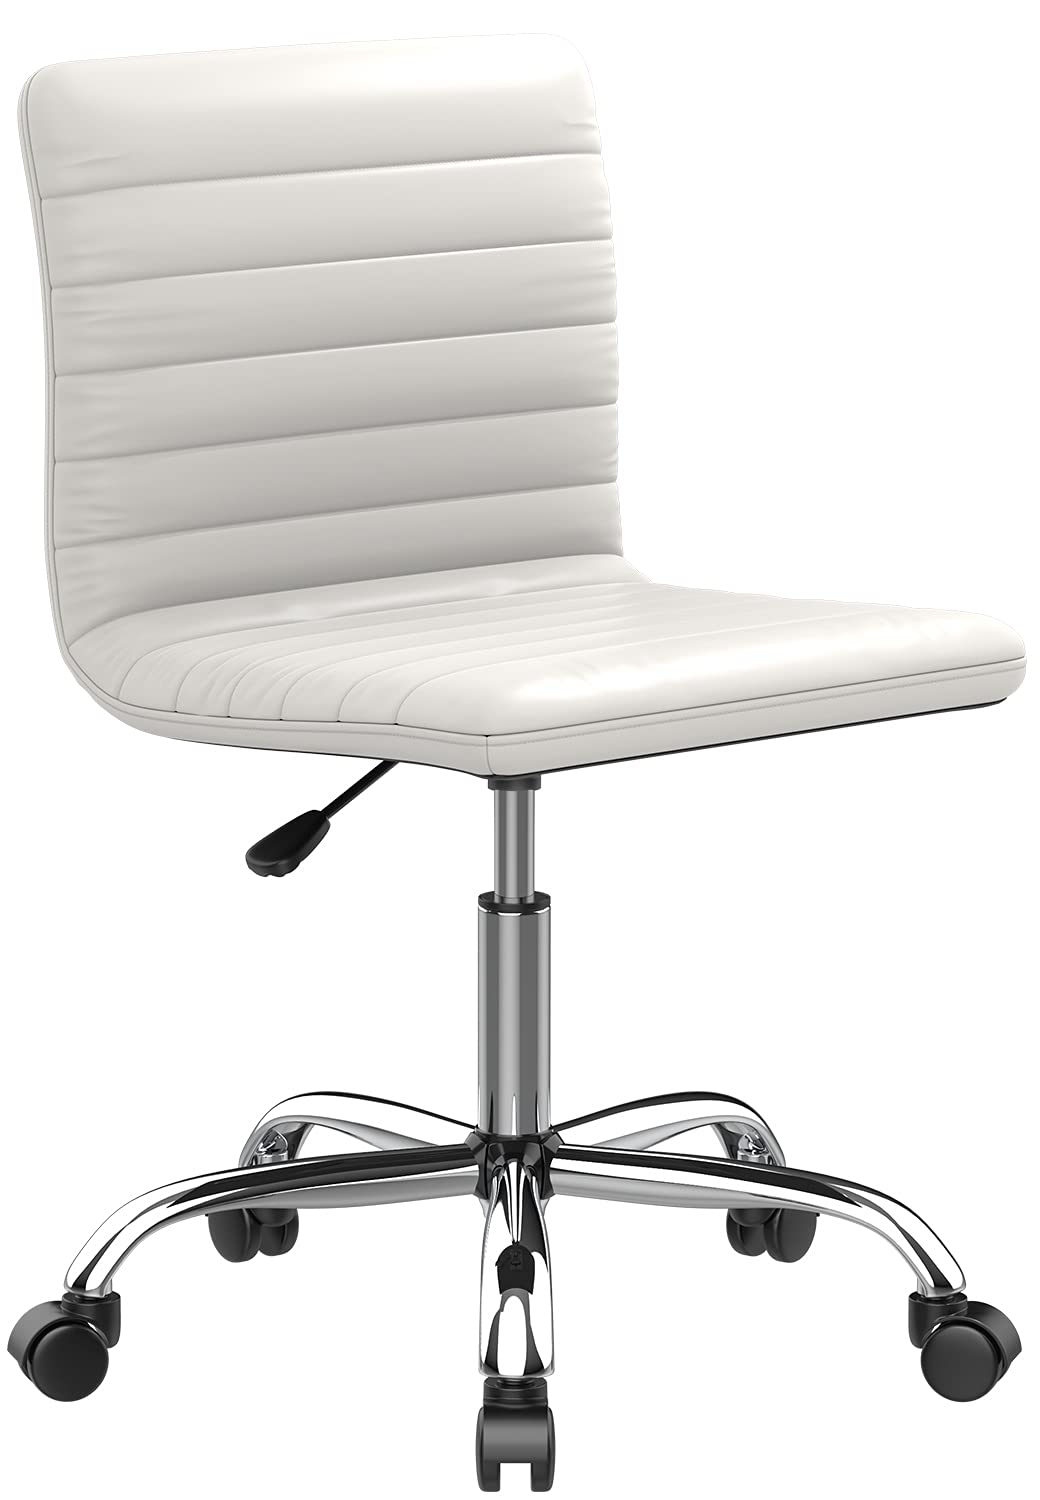 Home Office Chair, Computer Chair Adjustable Height Ribbed Low Back Armless Swivel Conference Room Task Desk Chairs (White)